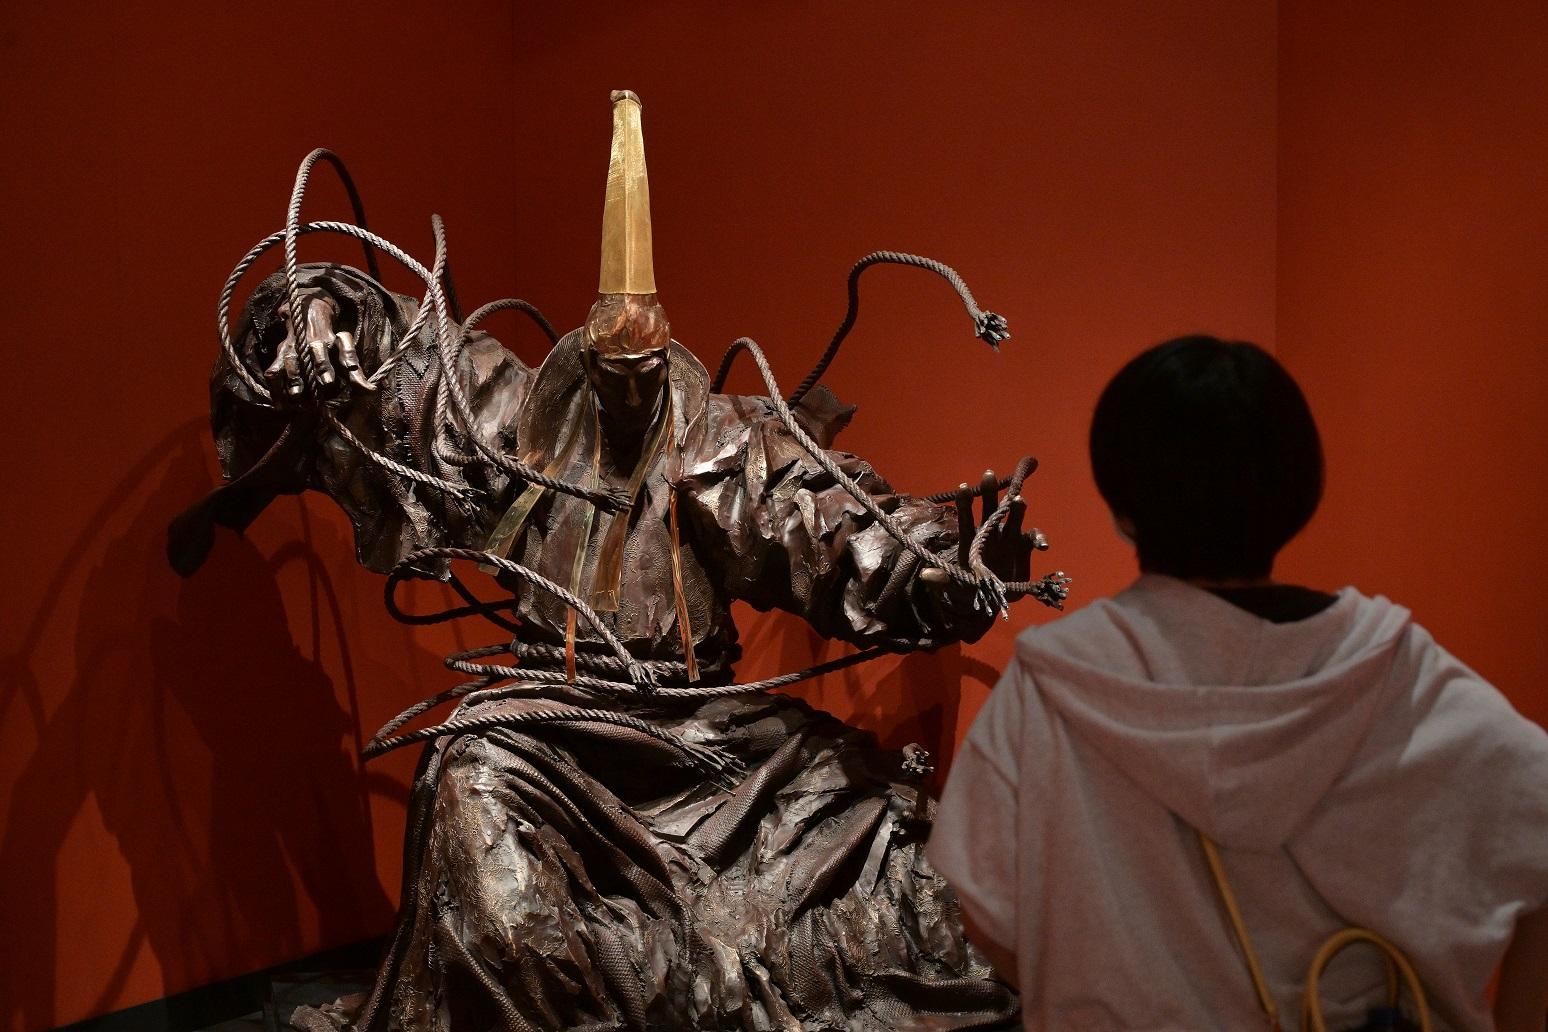 The "A Path to Glory - Jin Yong's Centennial Memorial, Sculpted by Ren Zhe" exhibition at the Hong Kong Heritage Museum (HKHM) has reached 100 000 visitors since its opening on March 16. Photo shows a visitor touring the exhibition.